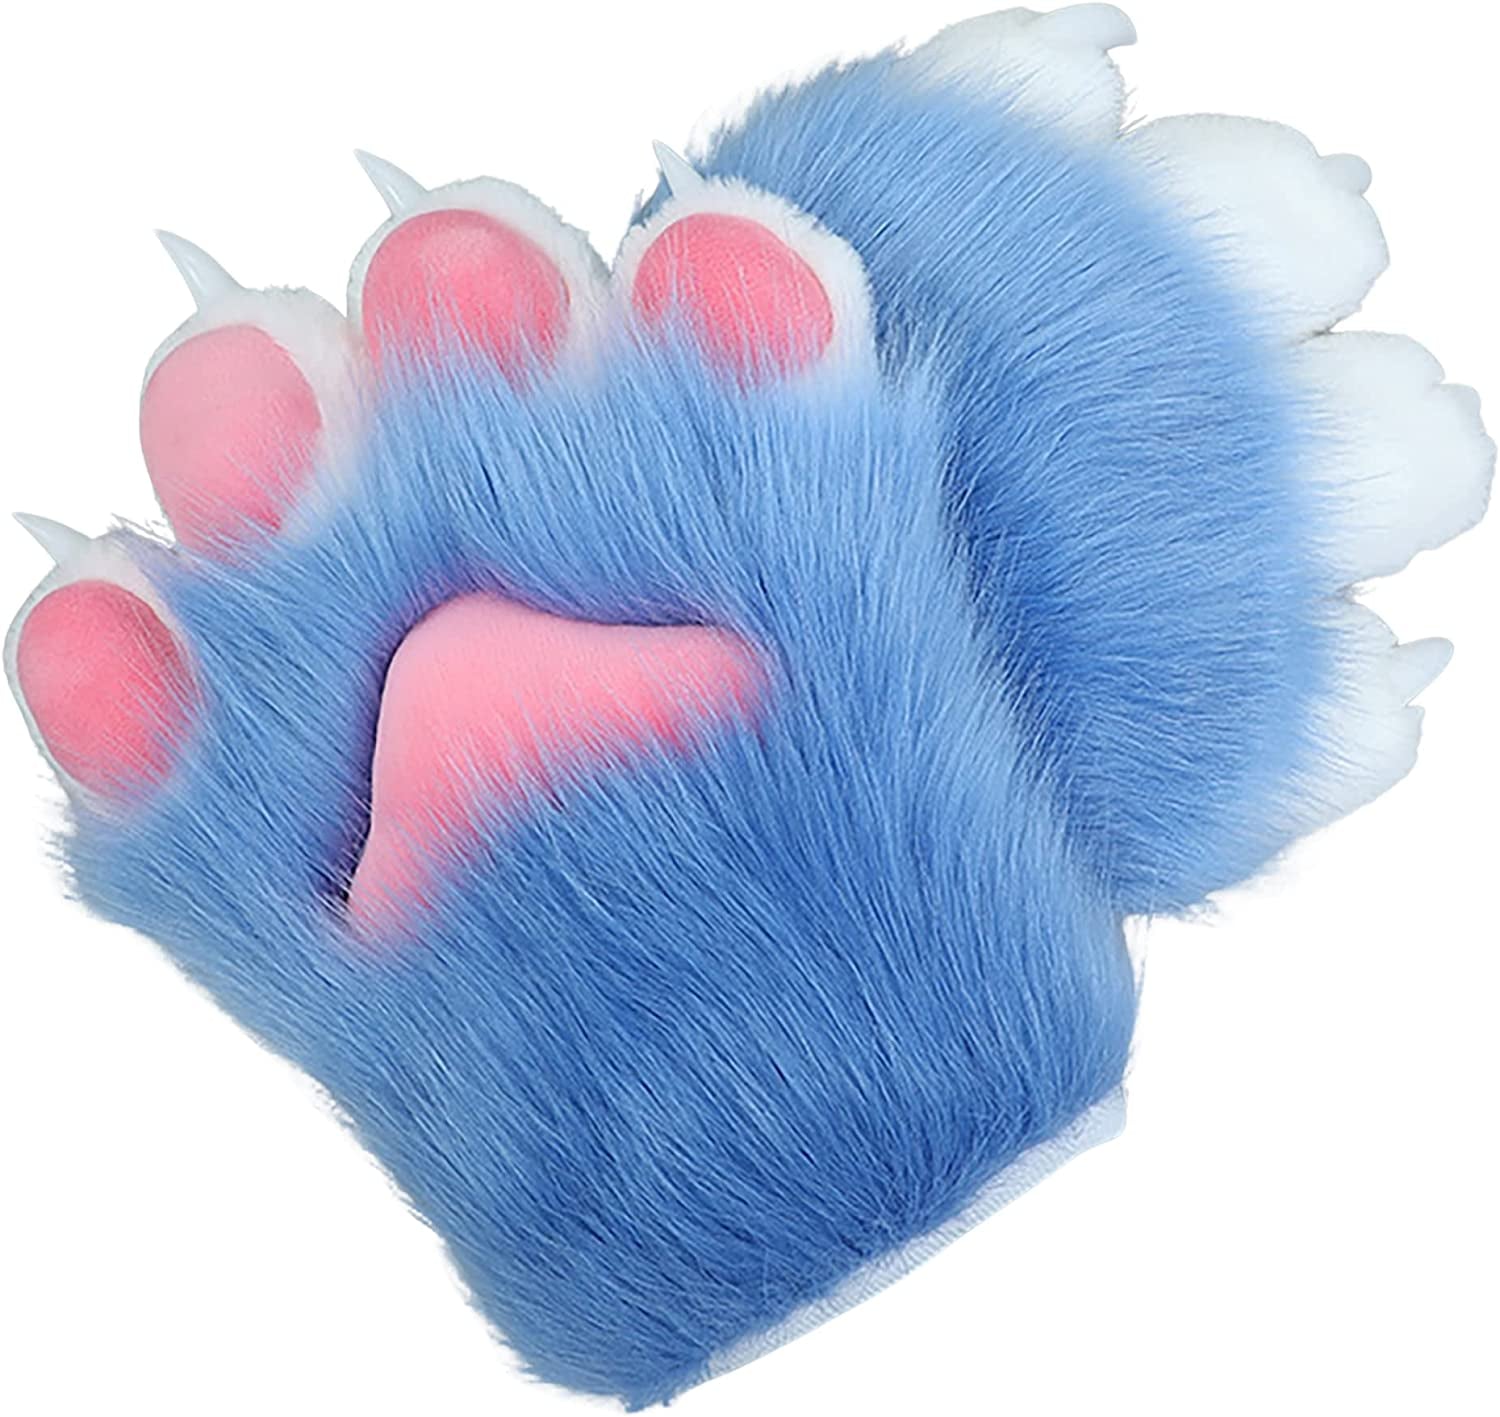 BNLIDES Cosplay Animal Cat Wolf Dog Fox Paws Claws Gloves Costume Accessories for Adults (White)